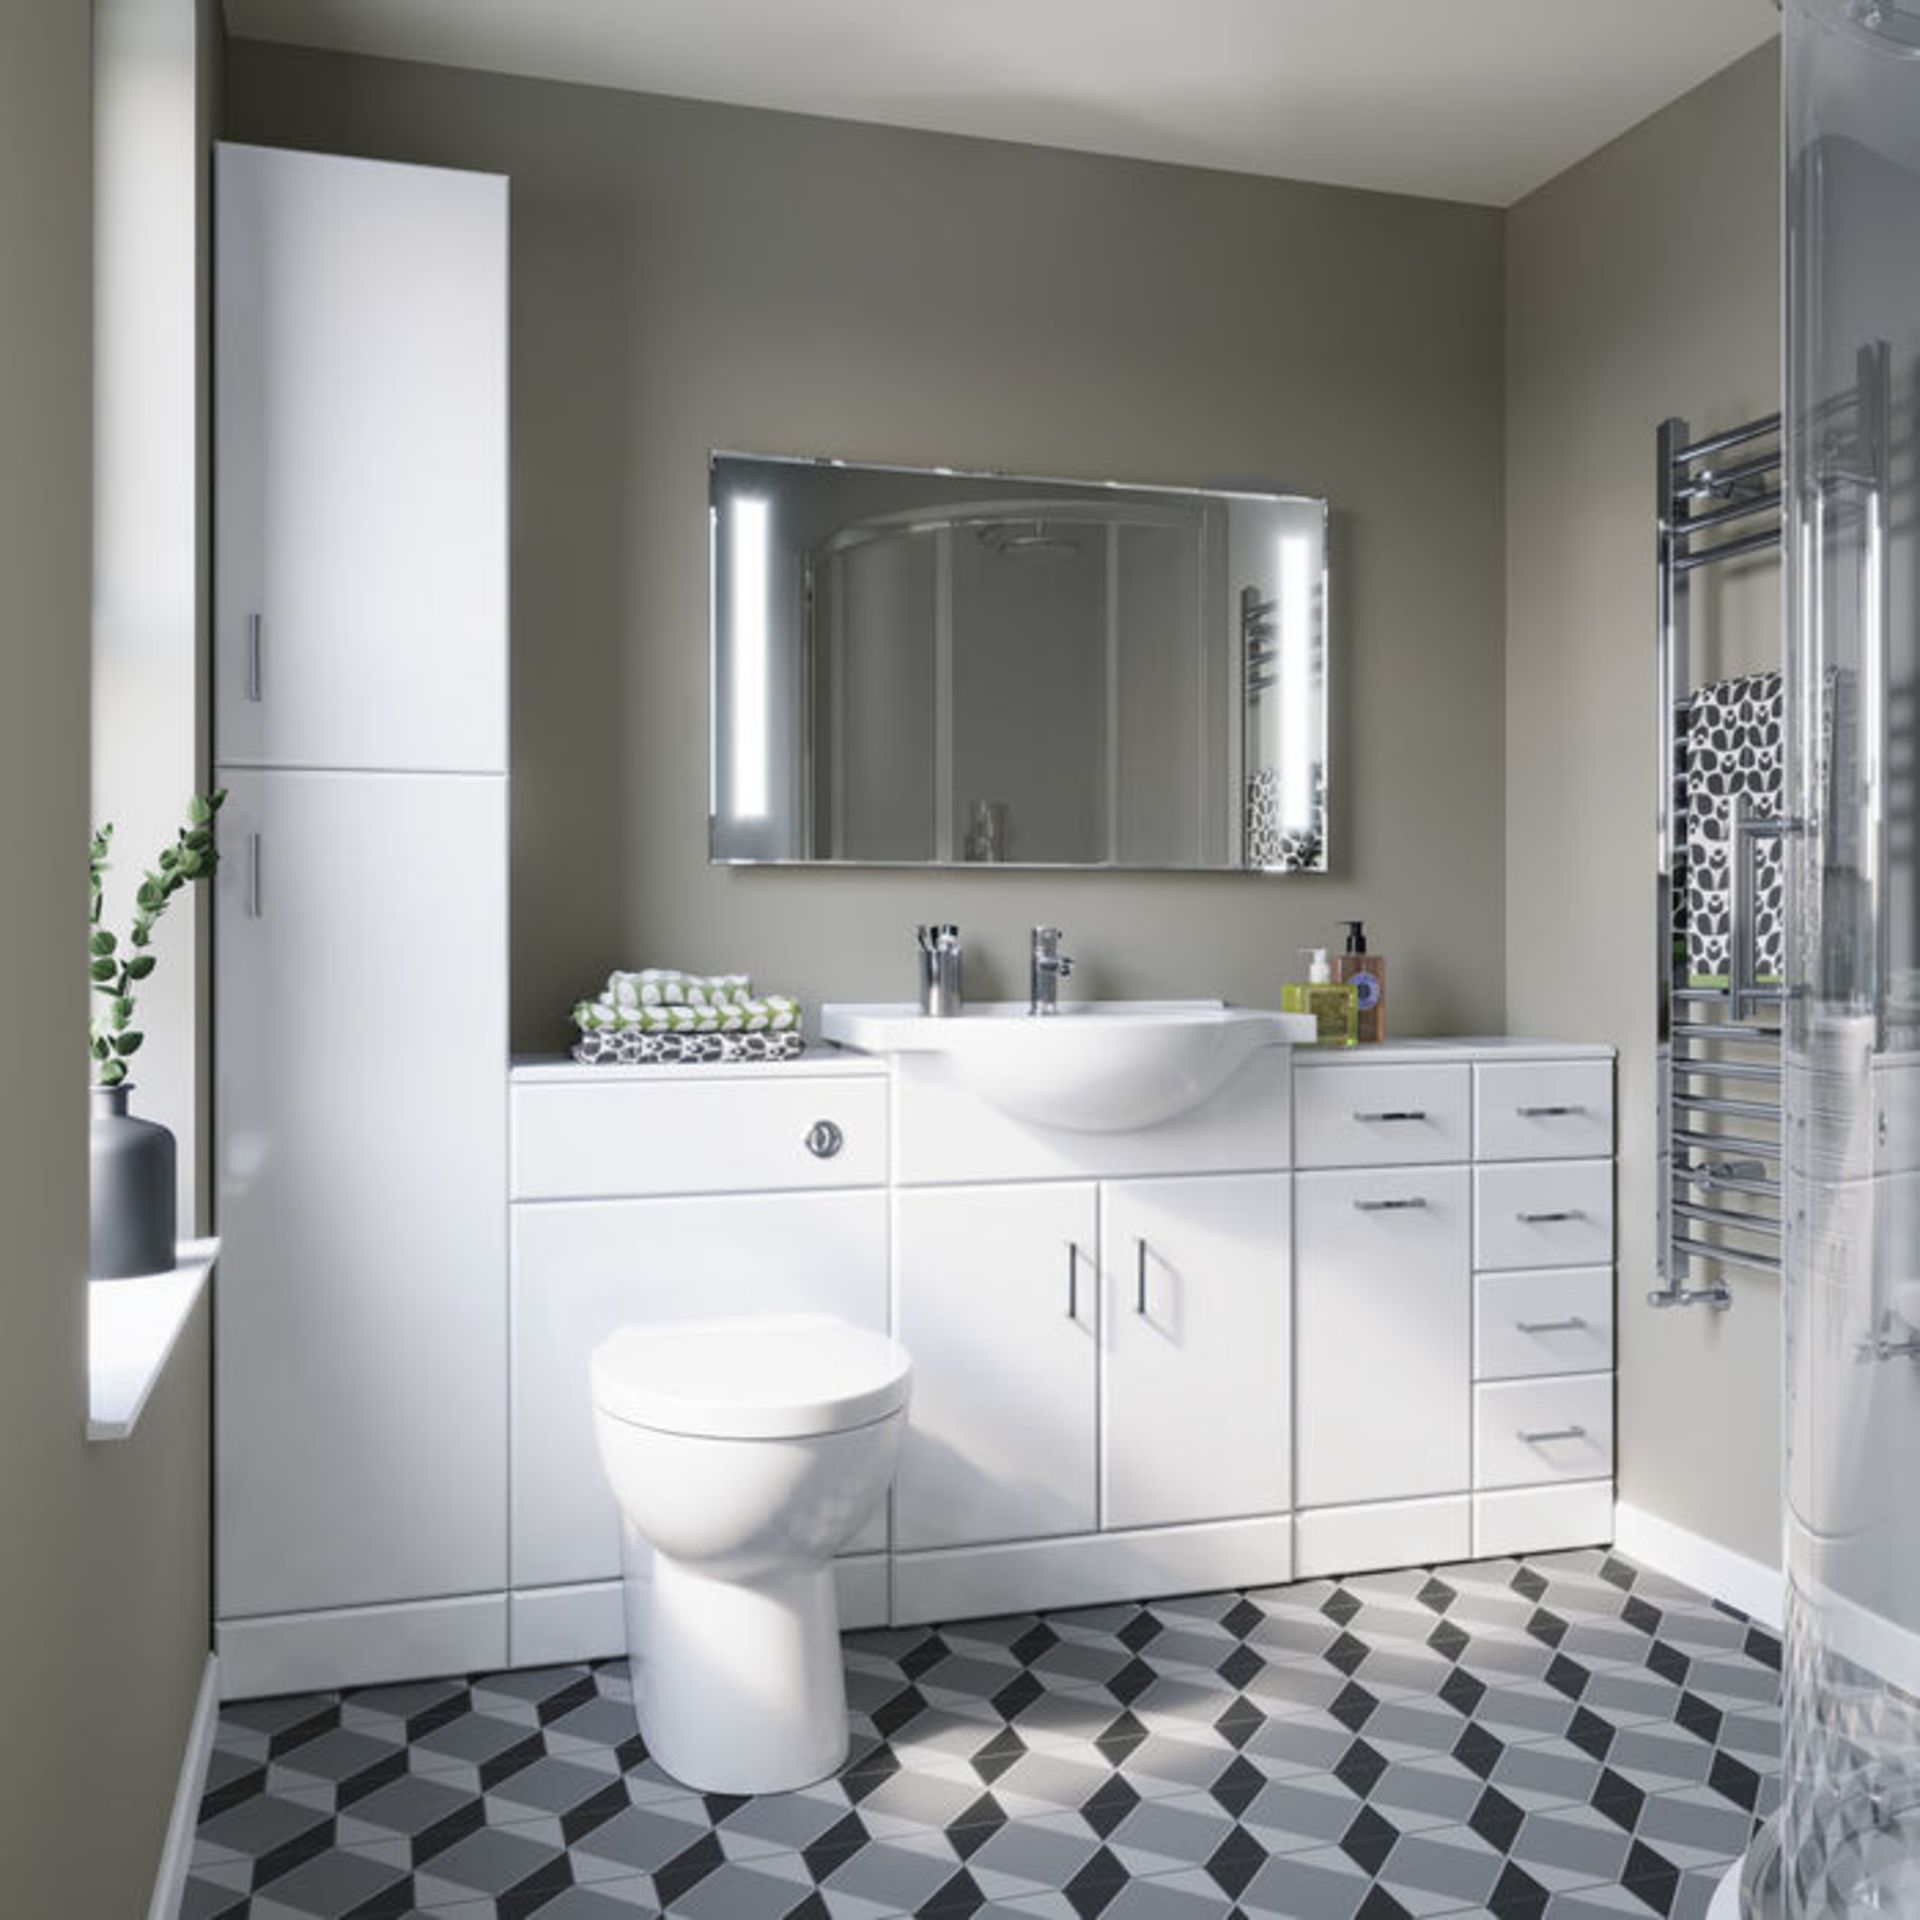 (GR27) 550x300mm Quartz Gloss White Built In Basin Cabinet RRP £349.99. COMES COMPLETE WITH BASIN. - Image 4 of 5